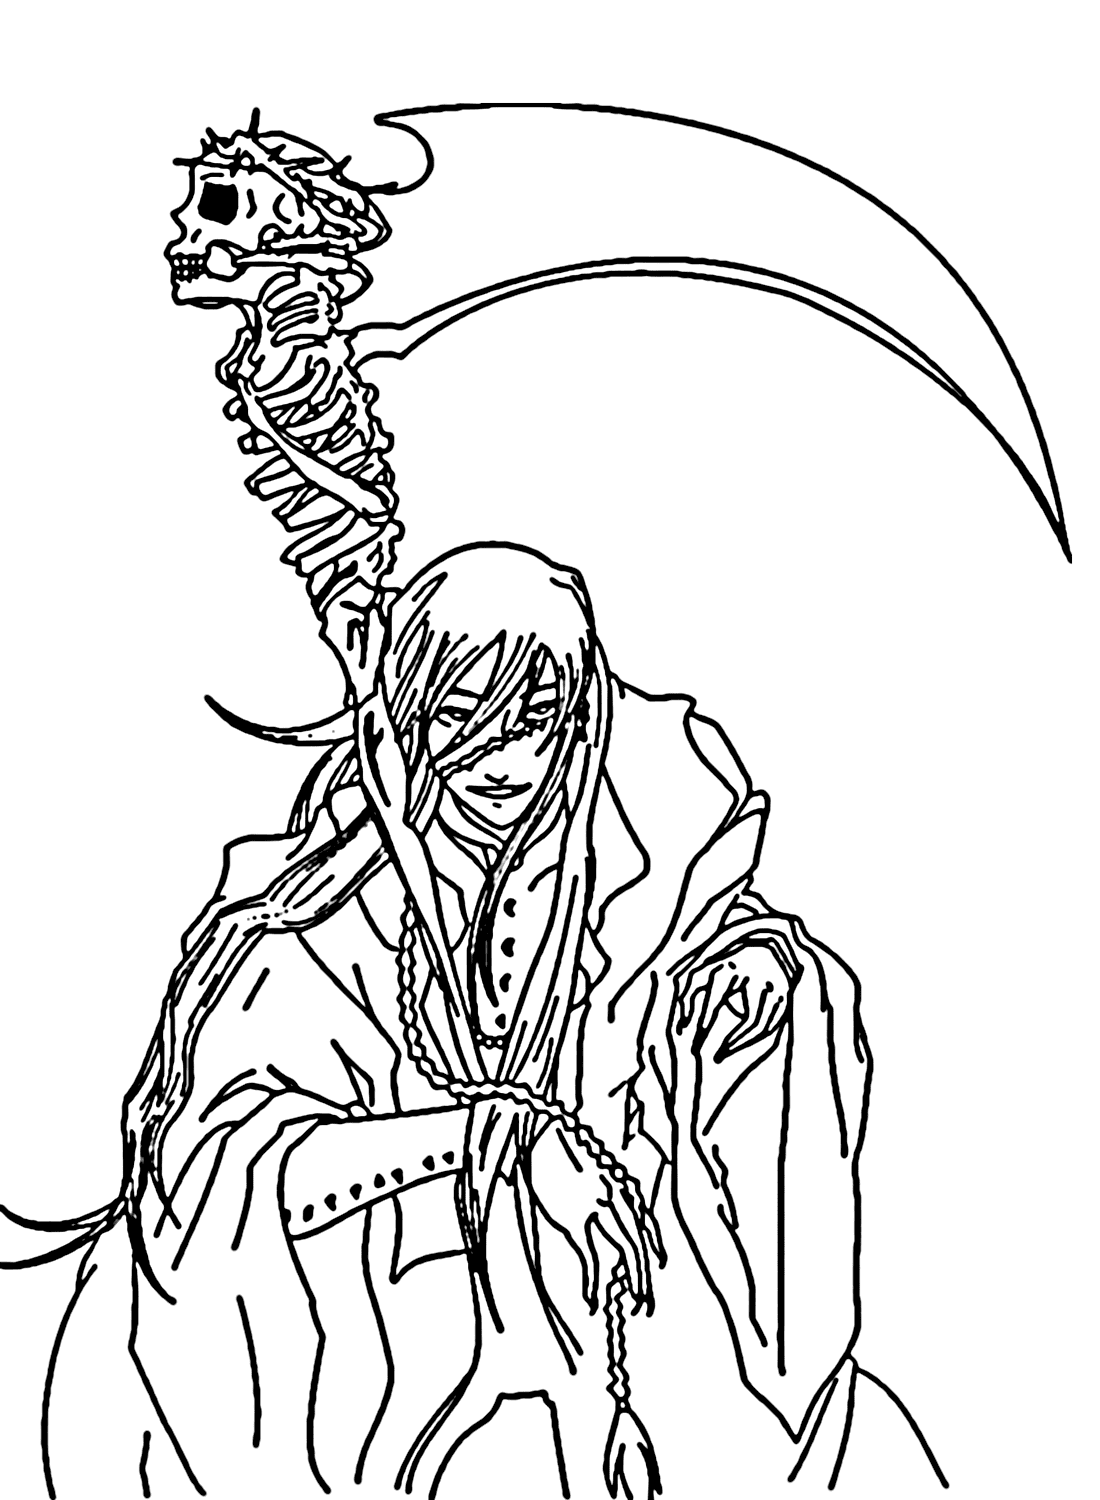 undertaker black butler coloring pages